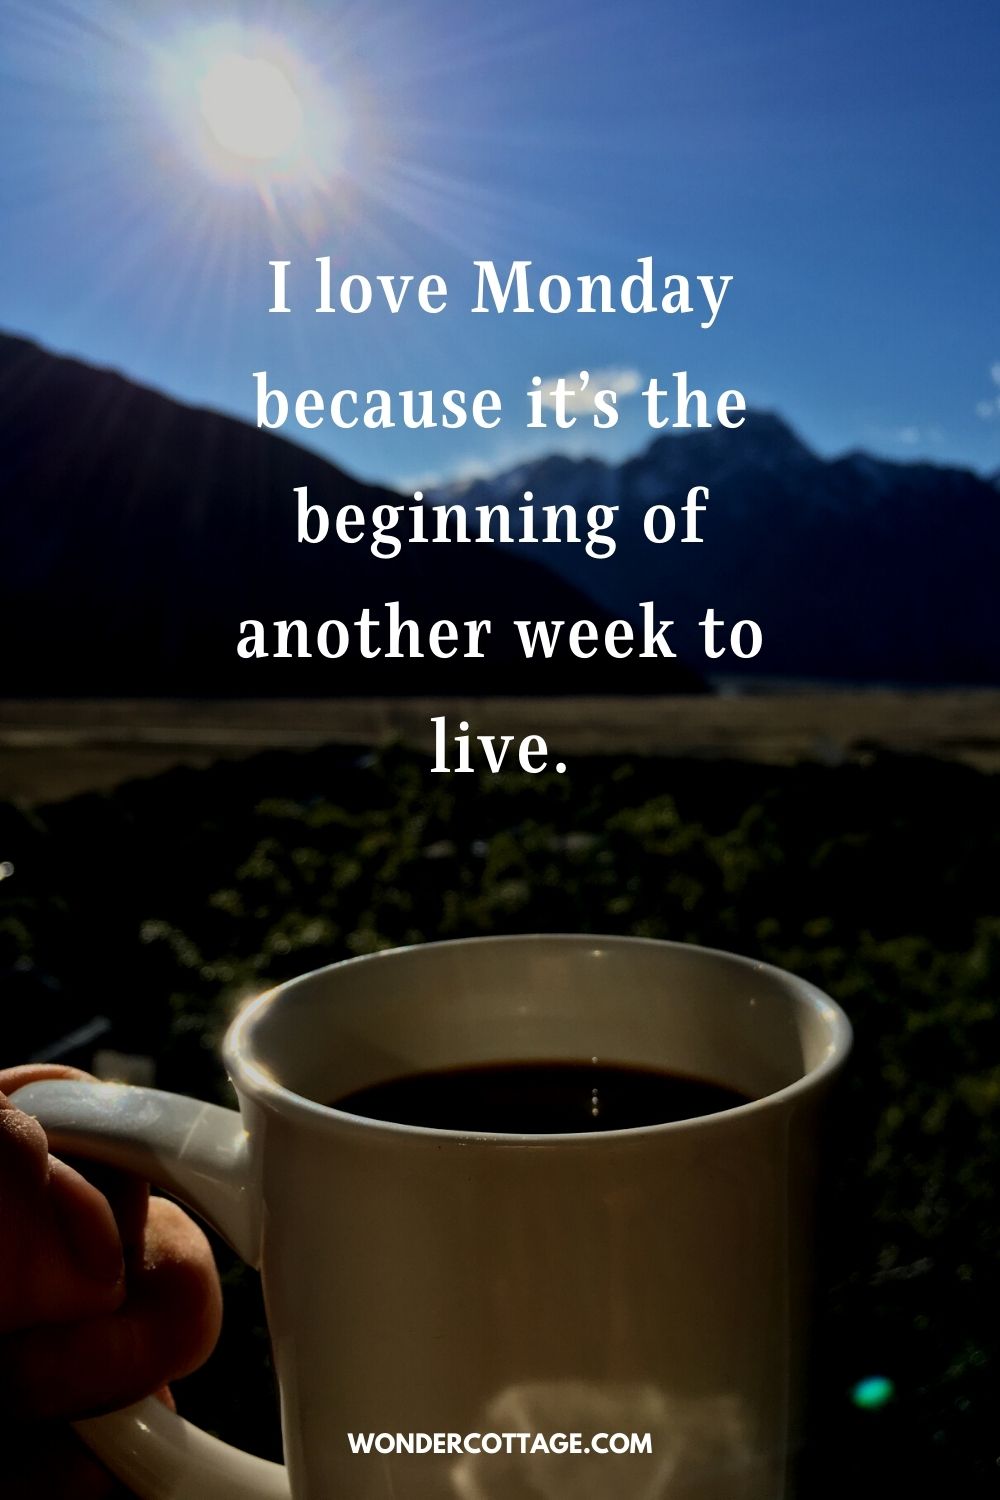 I love Monday because it’s the beginning of another week to live.